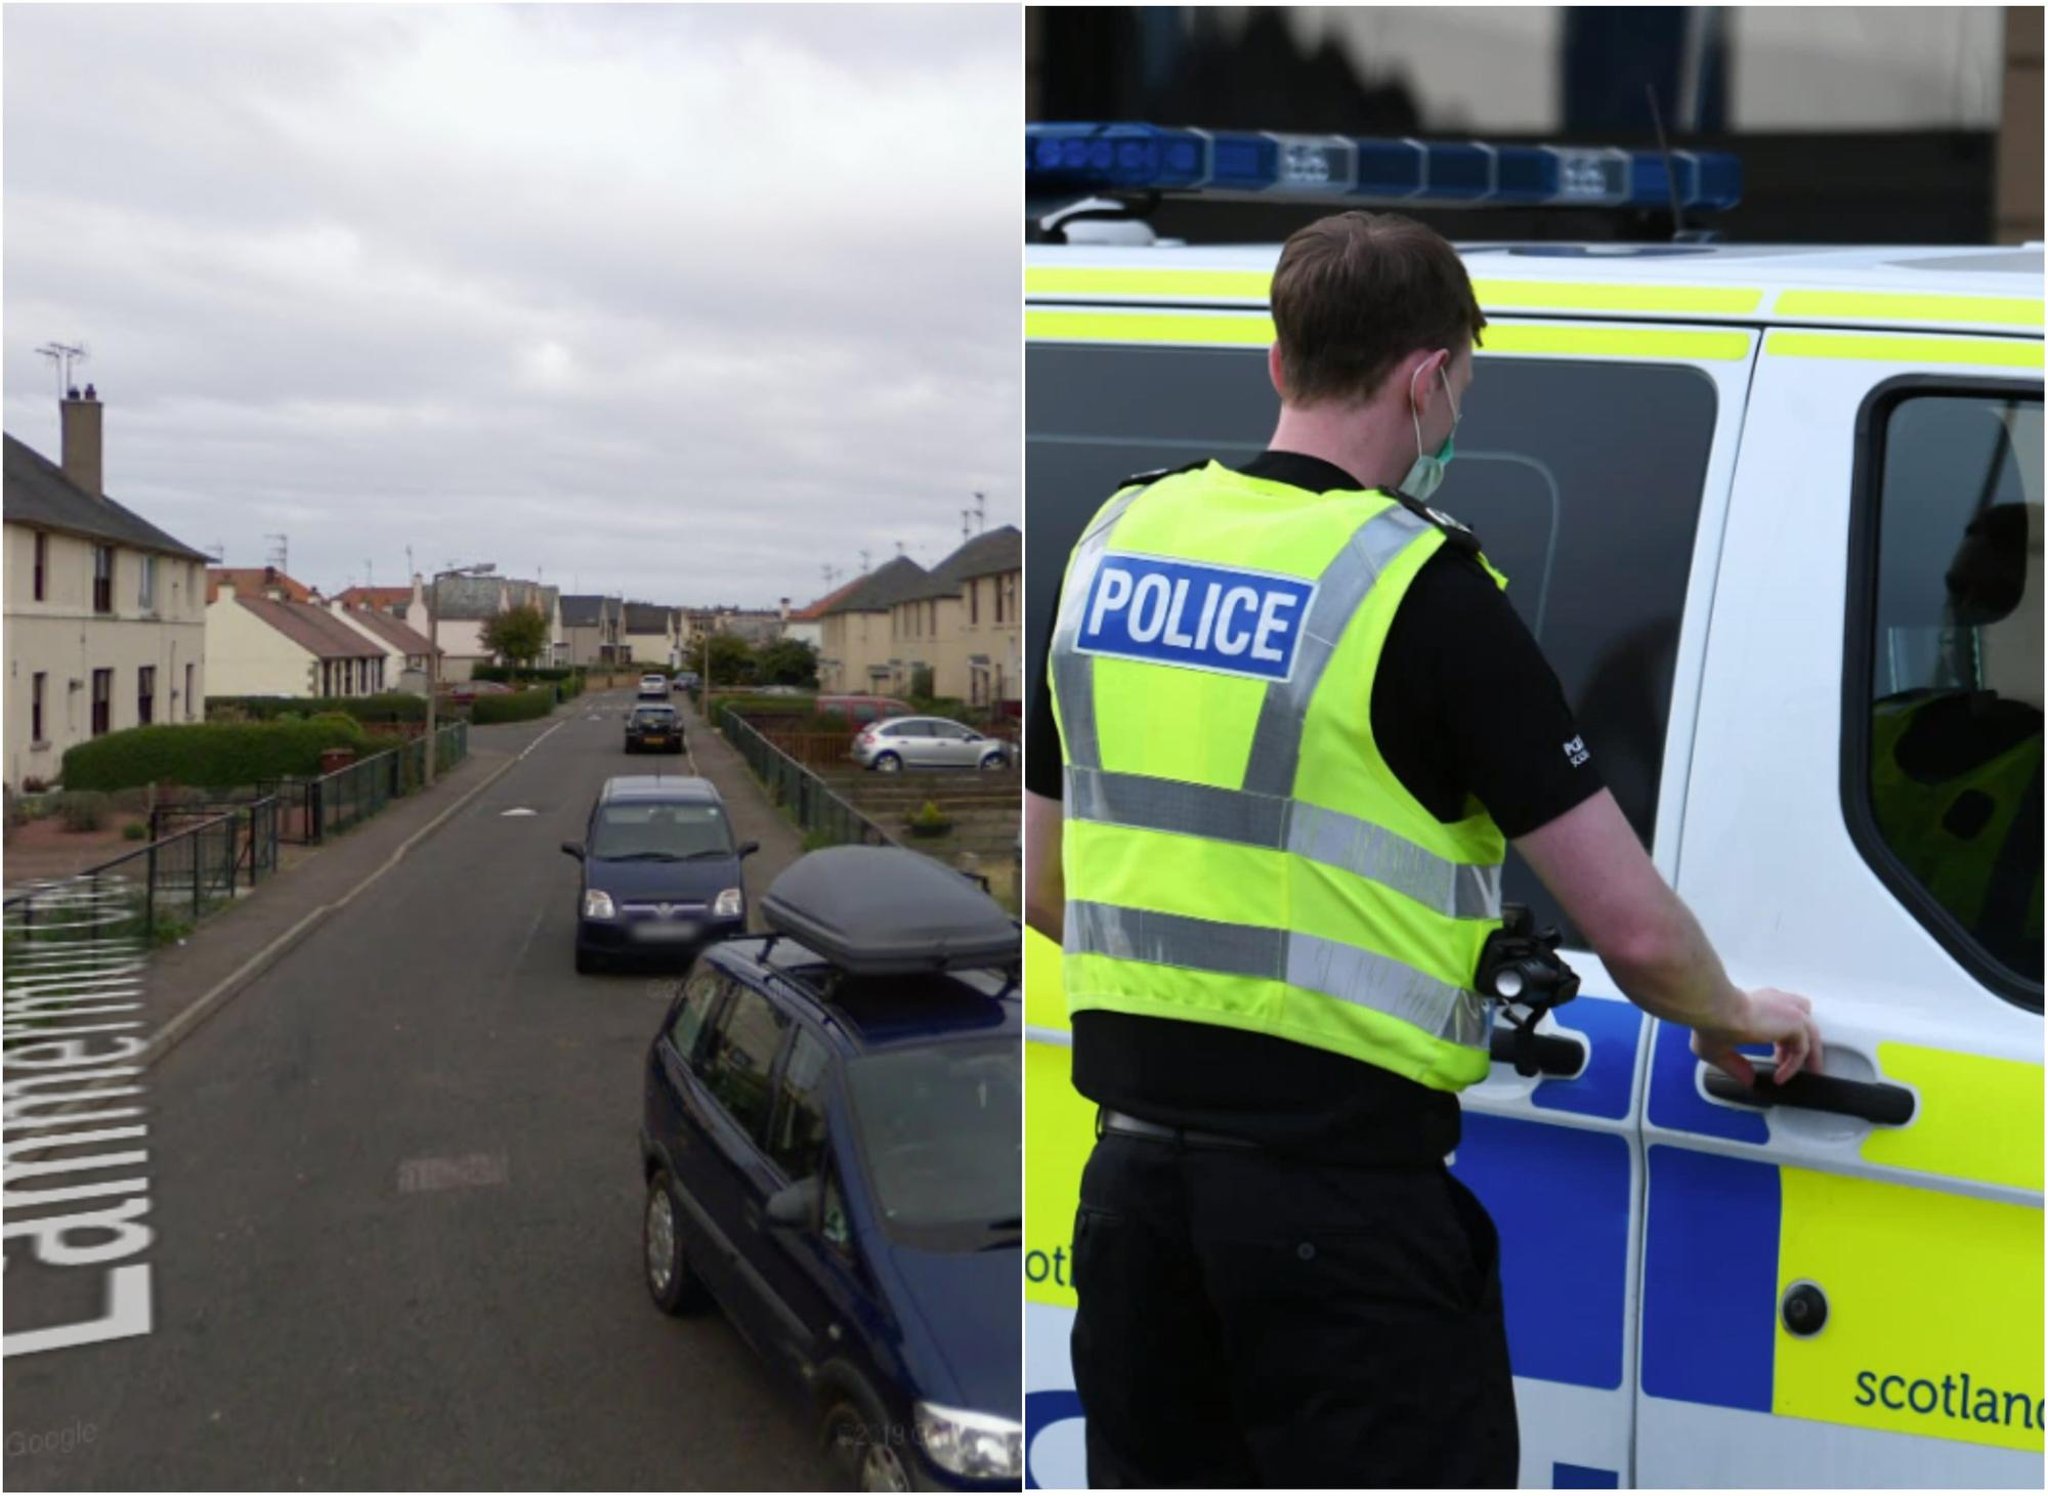 Man arrested after £1500 worth of cocaine and other drugs discovered in East Lothian